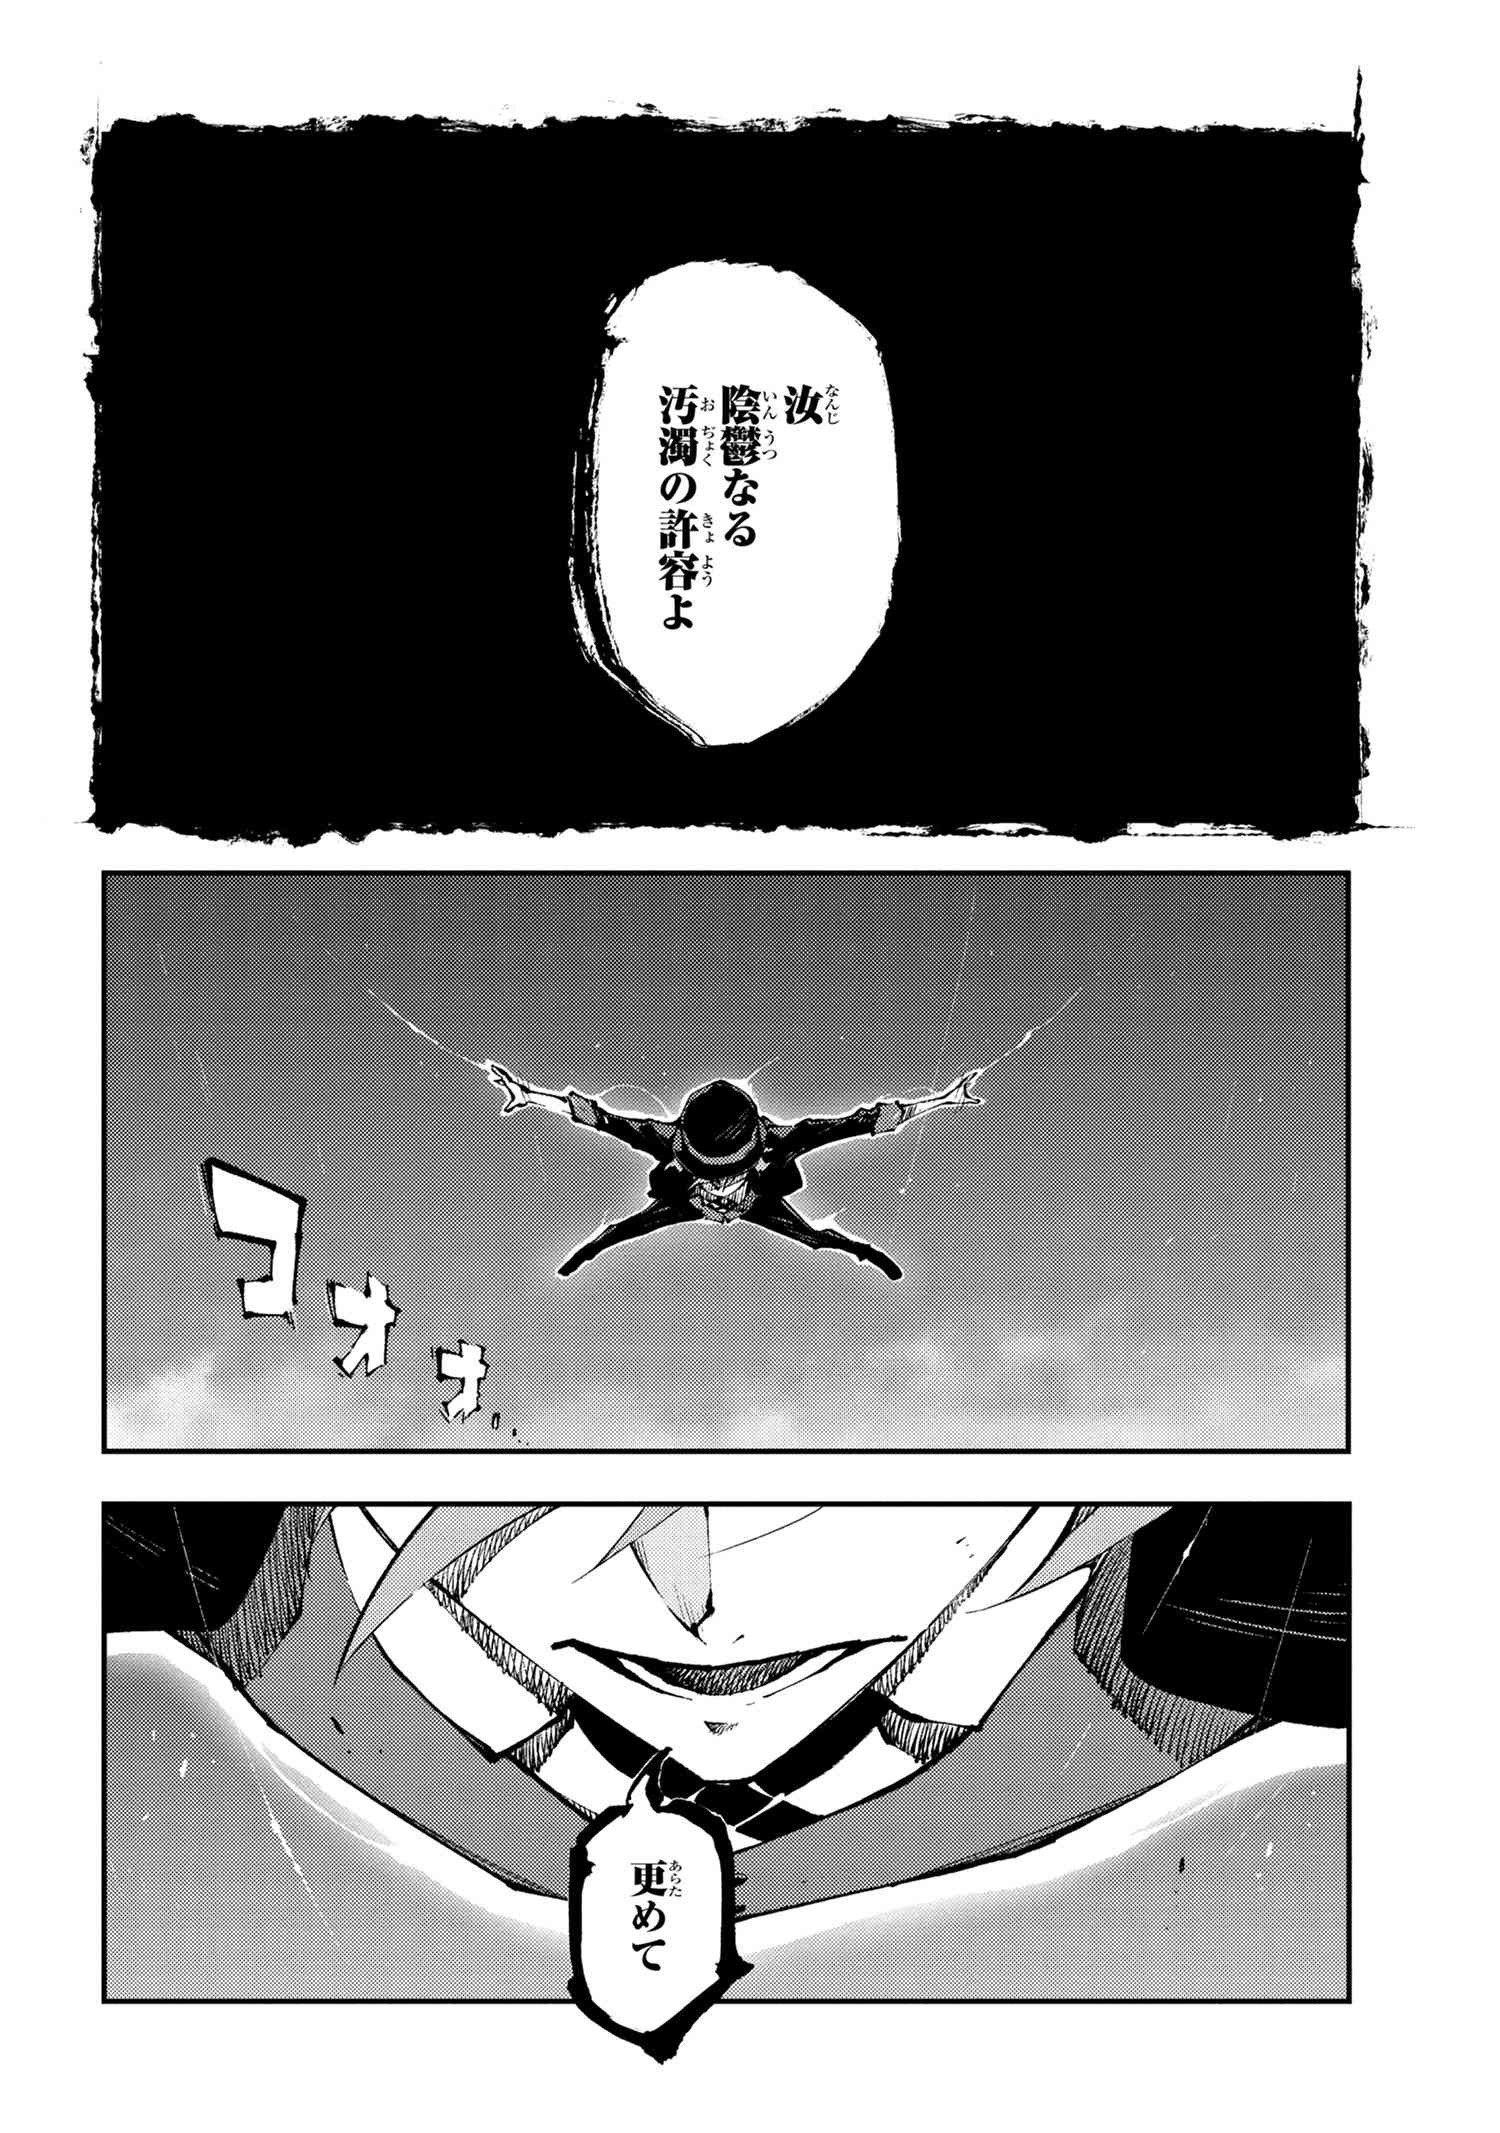 Bungou Stray Dogs: Dead Apple - Chapter 13-2 - Page 2